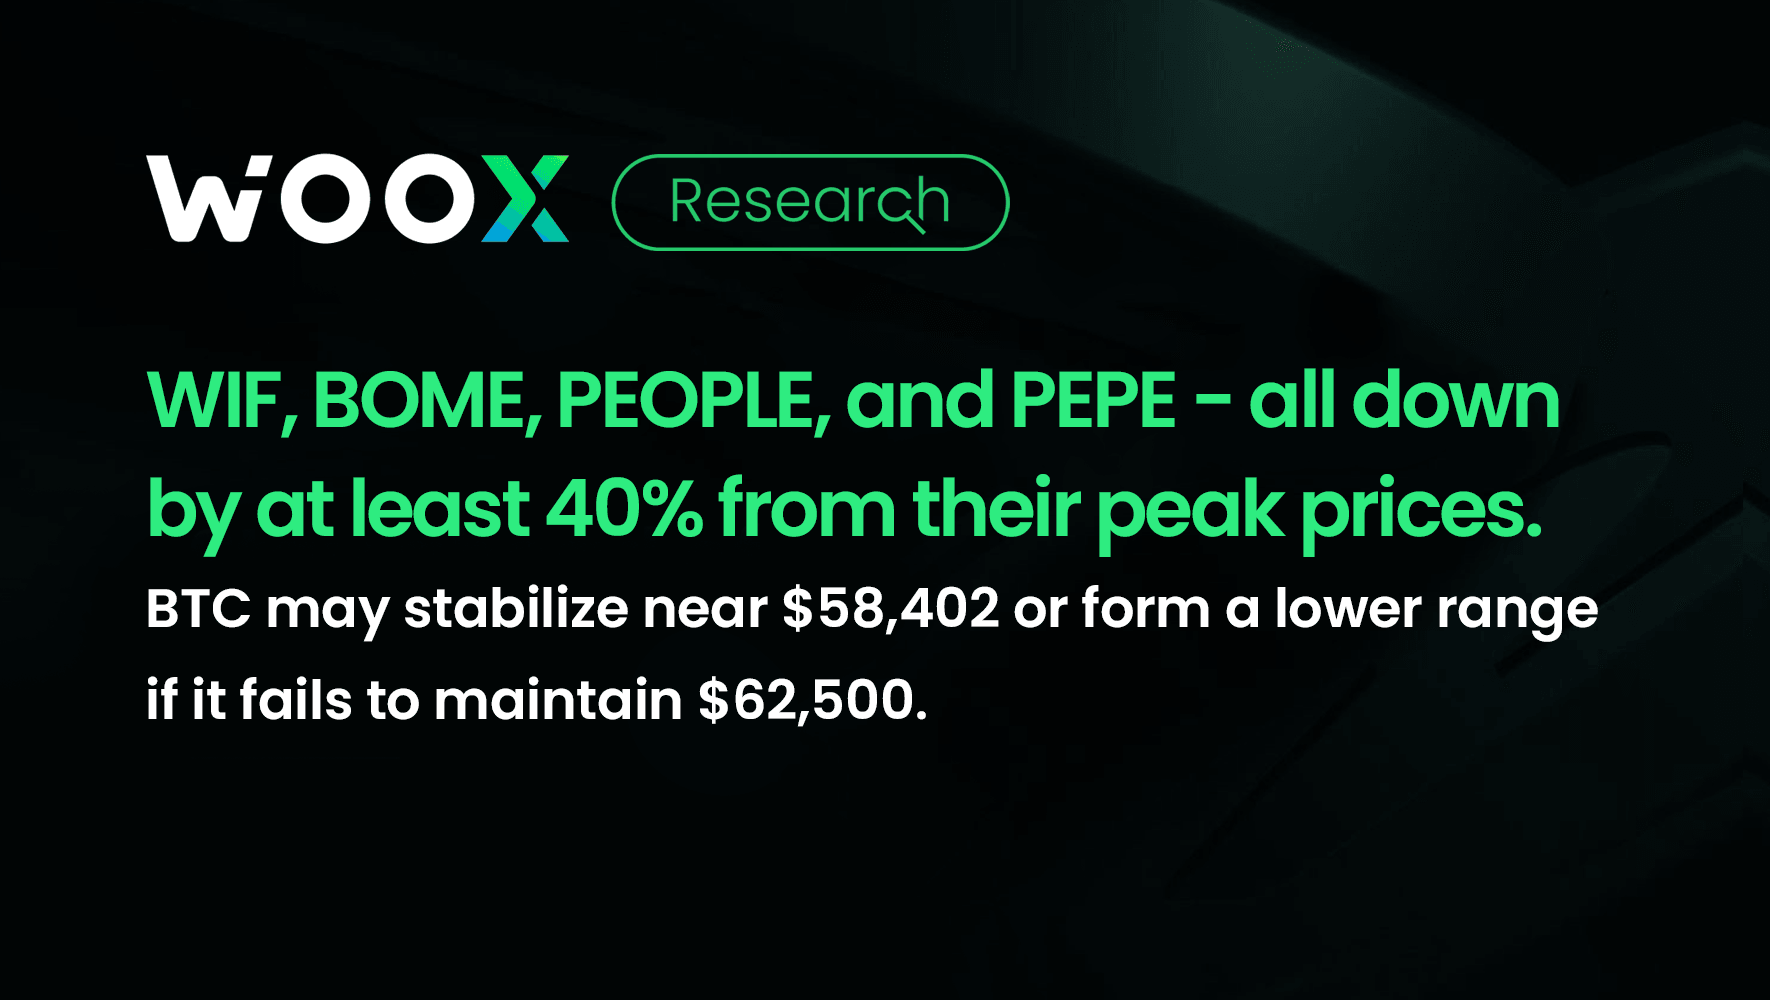 WIF, BOME, PEOPLE, and PEPE - all down by at least 40% from their peak prices